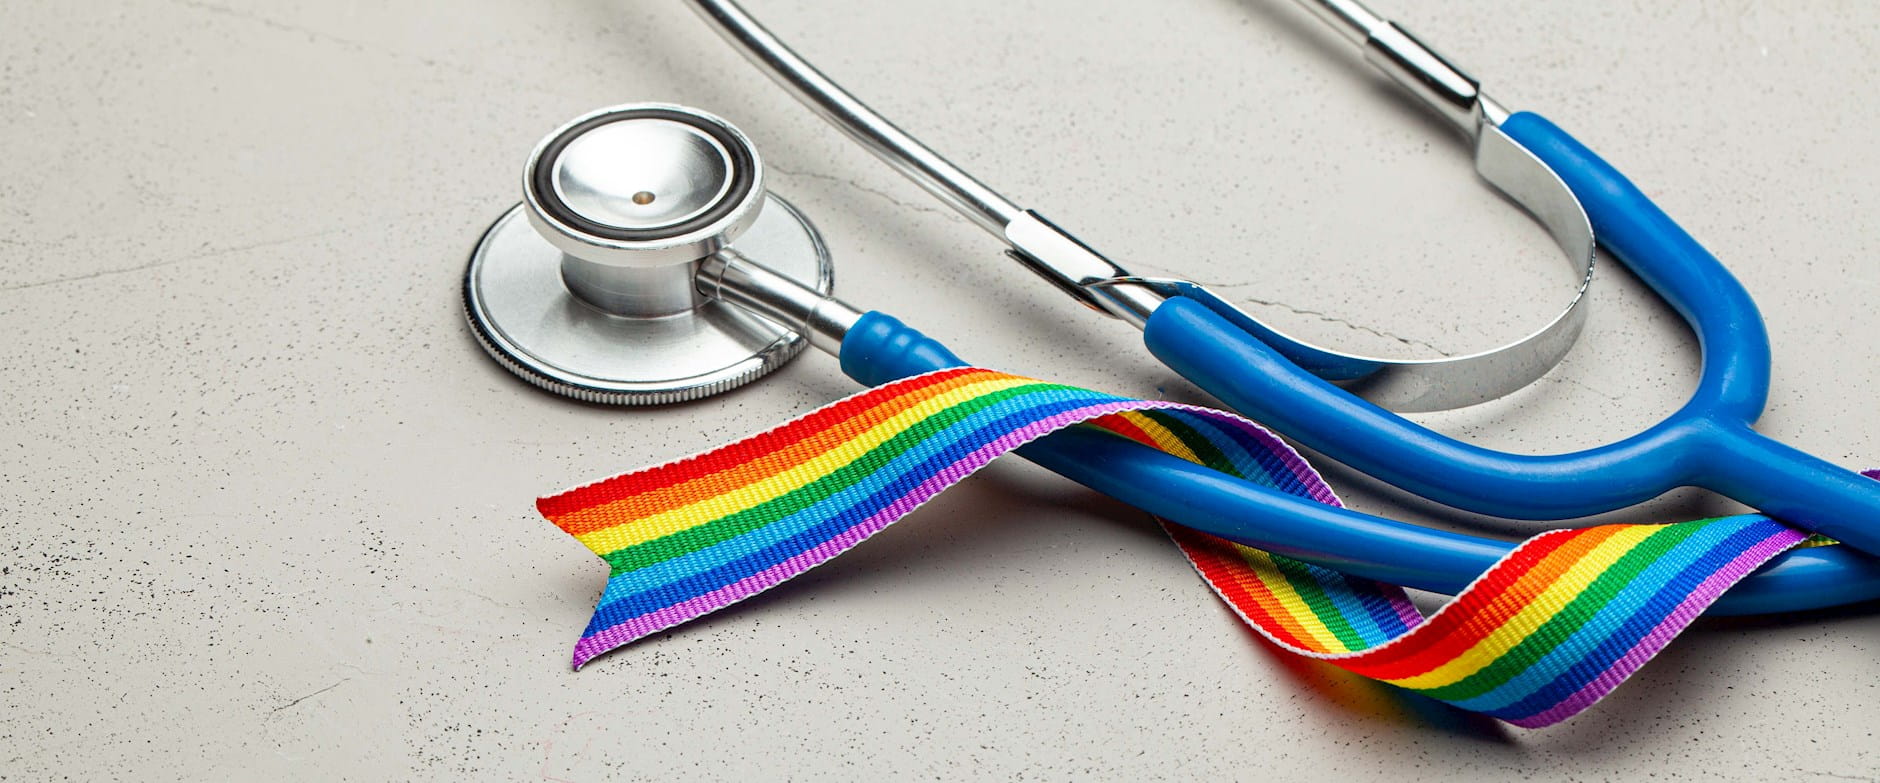 Stethoscope laying on a surface wrapped in an LGBTQIA+ rainbow ribbon